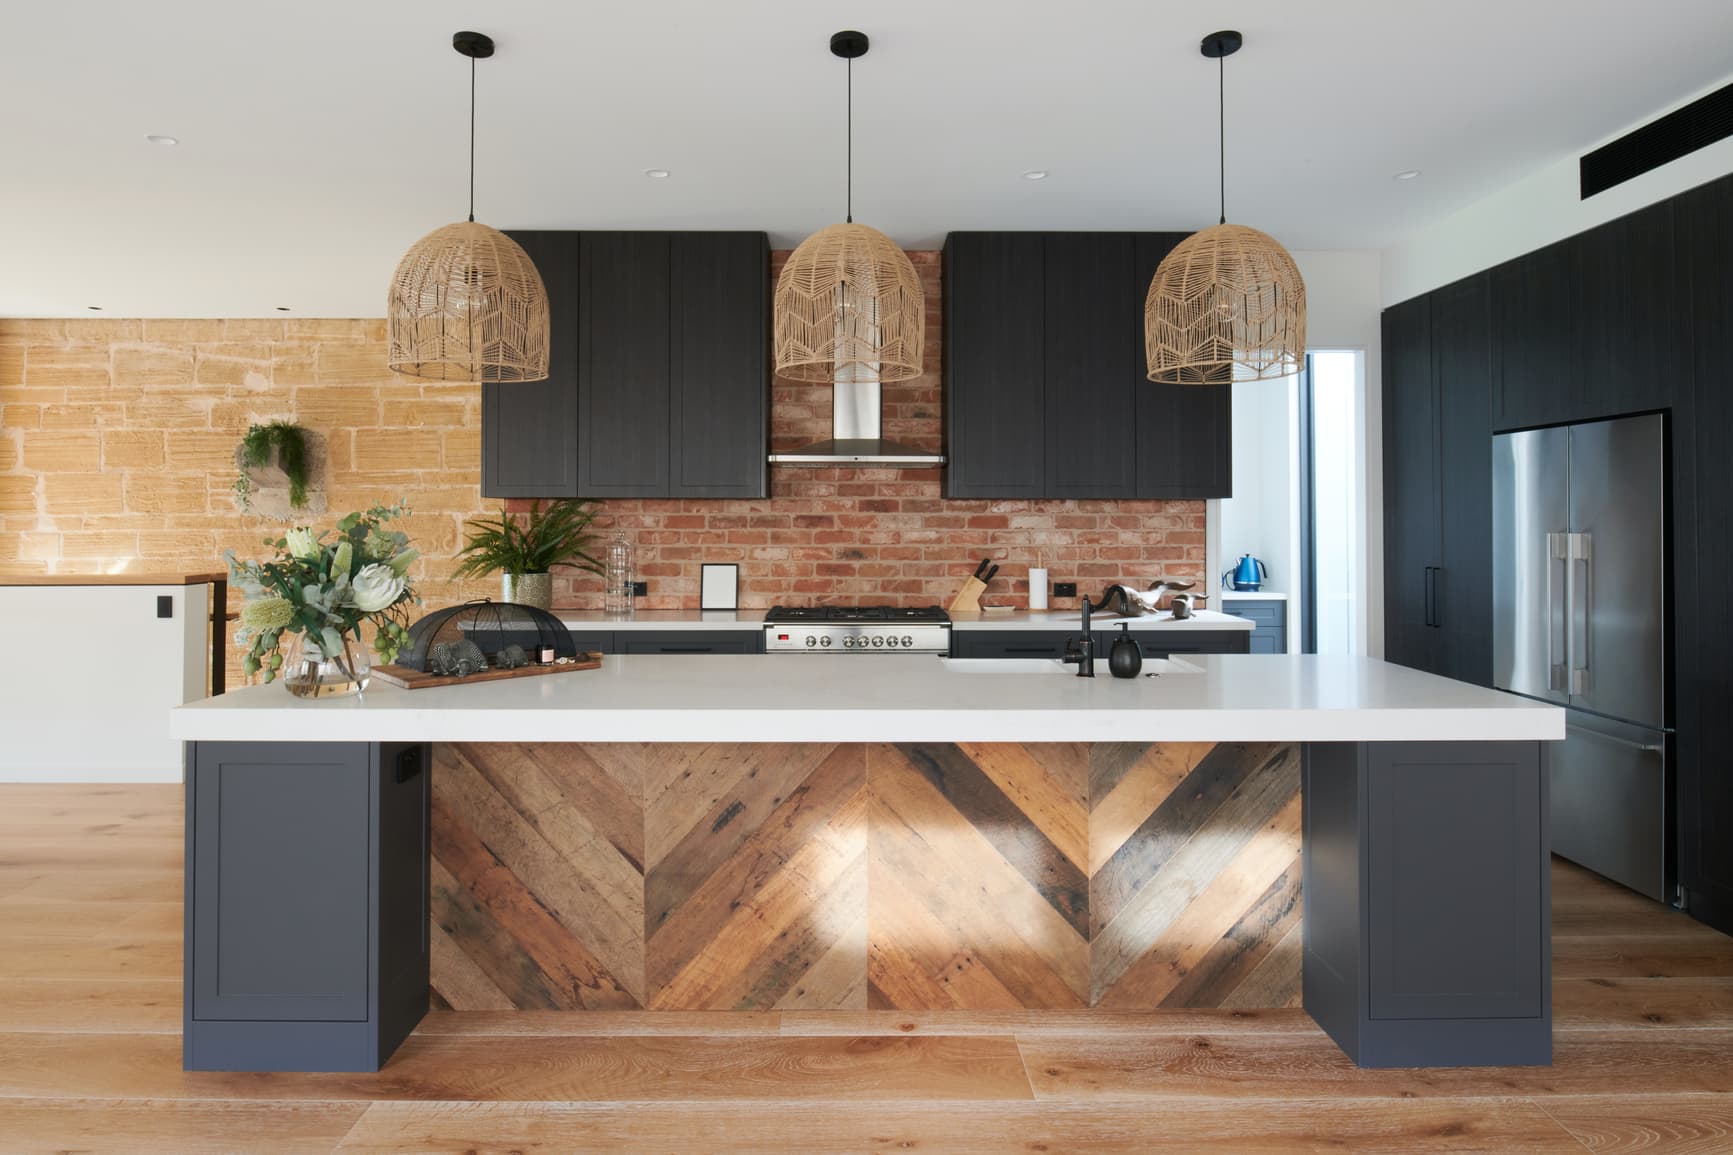 20 Kitchen Design Trends That'll Be Huge in 2020   Kitchn